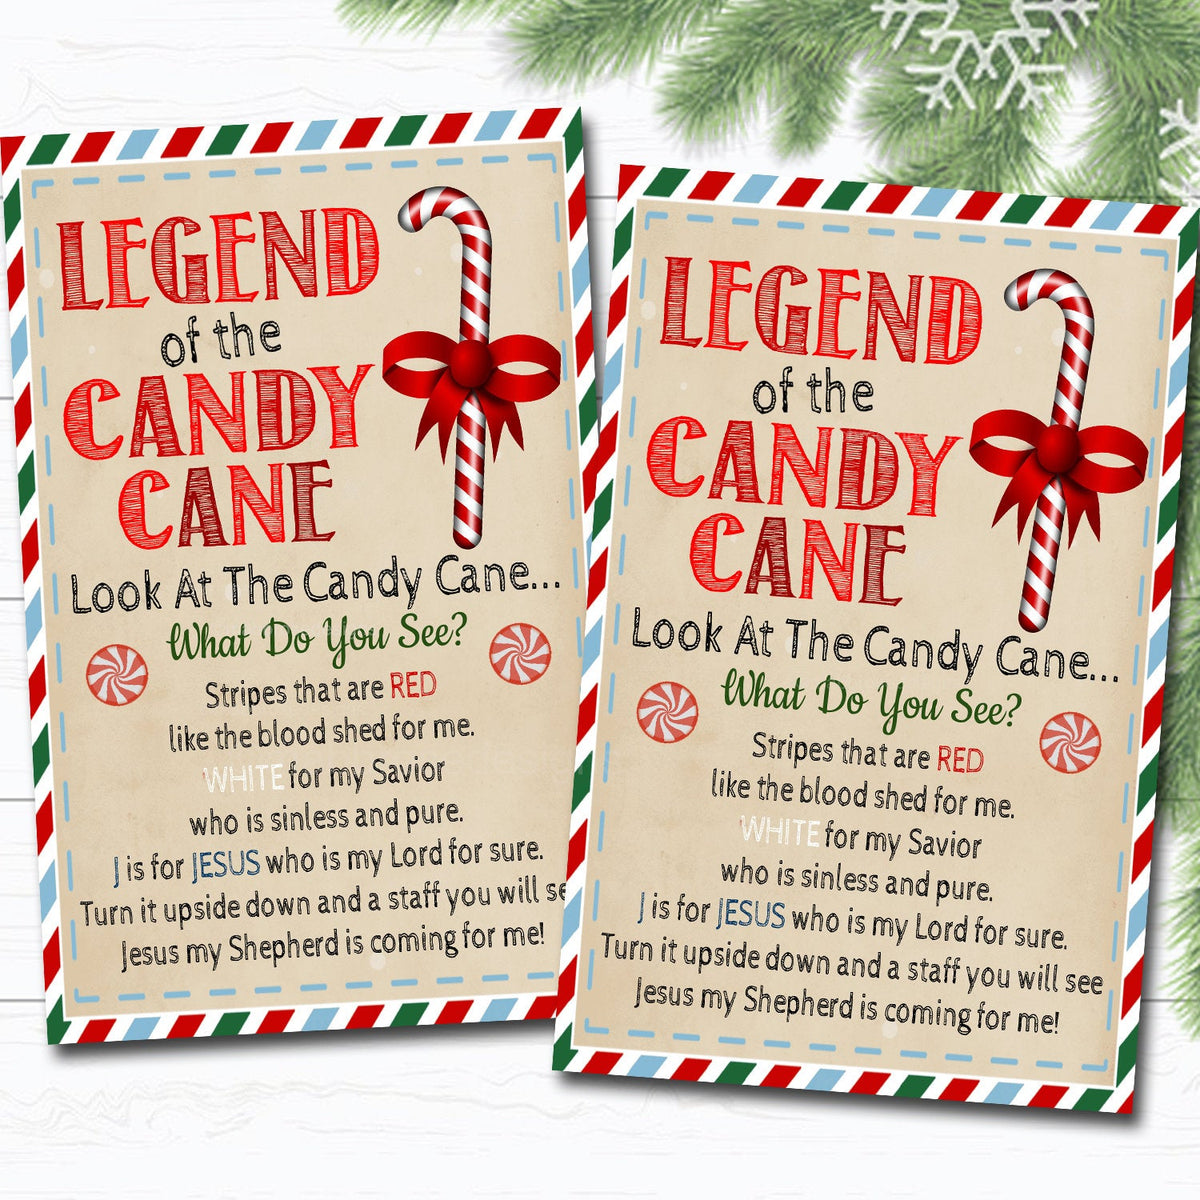 Legend of the Candy Cane Tags TidyLady Printables